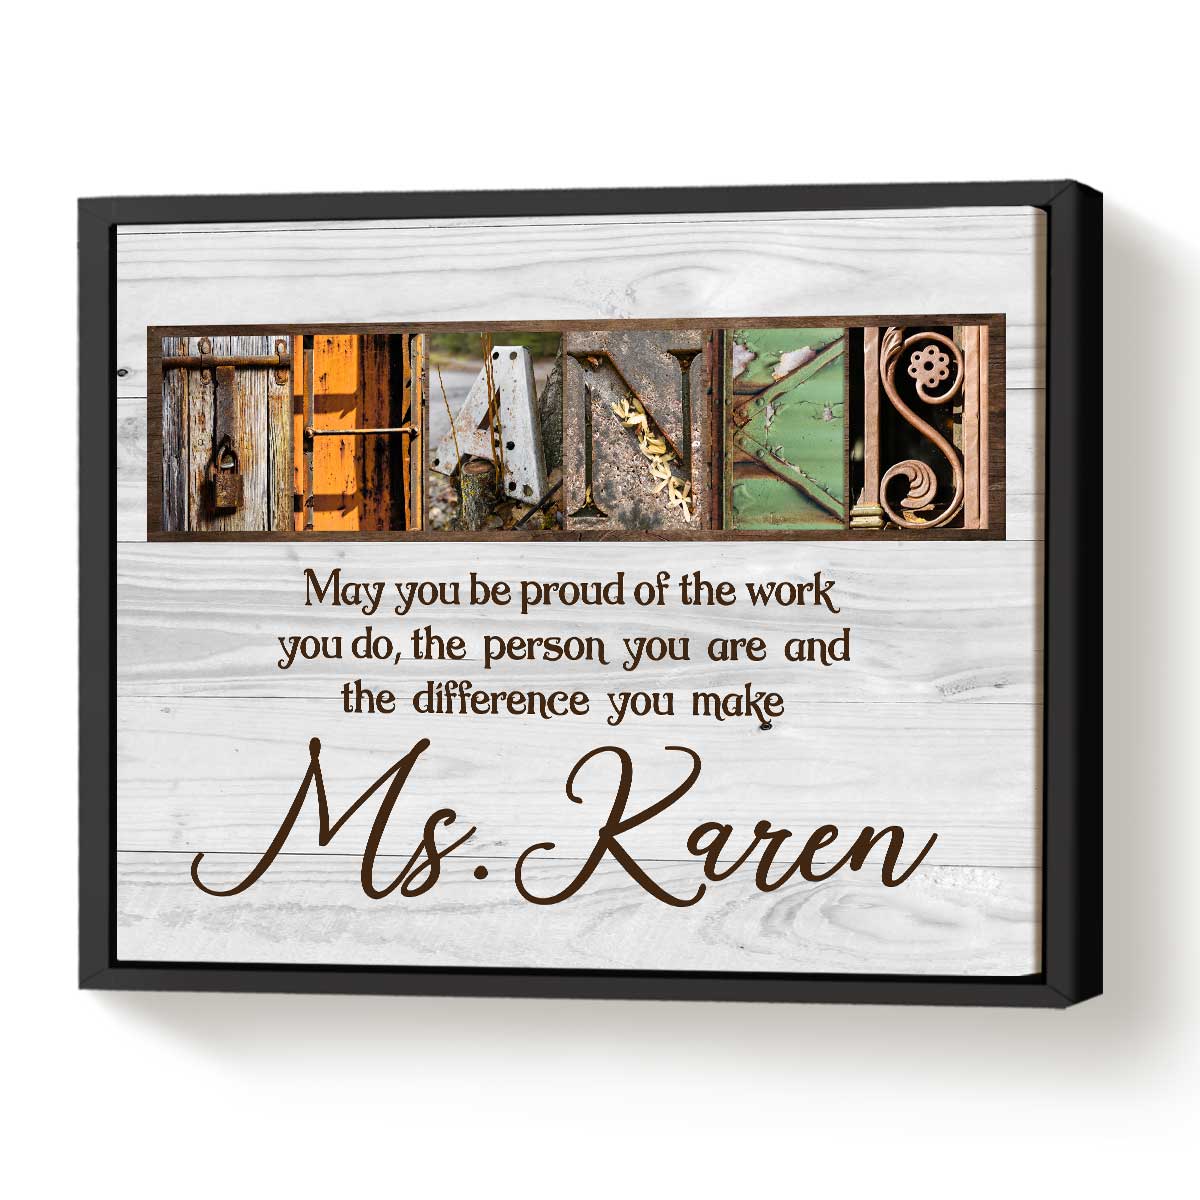 Farewell Gifts for Coworkers, Office Decor Sign Gift for Coworker, Leaving Going  Away Gifts for Colleague, Work Bestie Gifts Desk Decor Plaque : Amazon.in:  Home & Kitchen